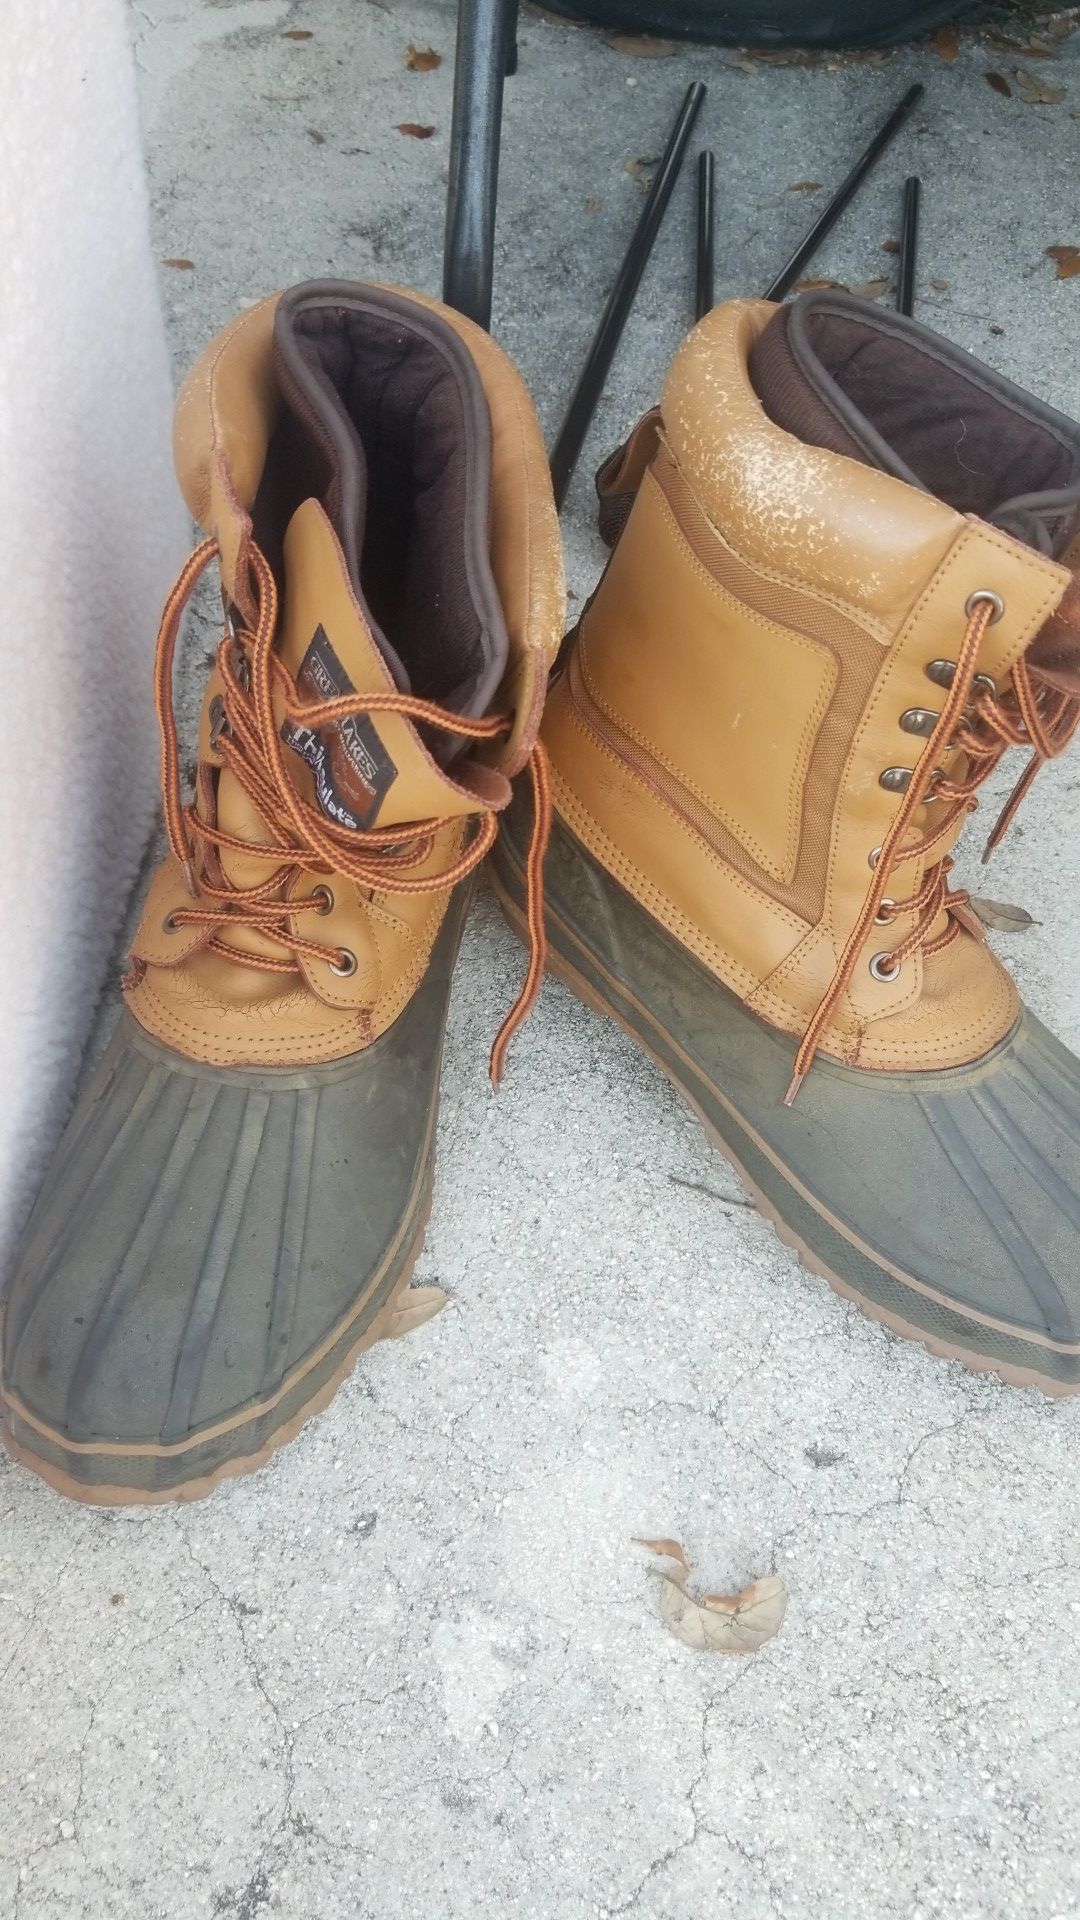 Size 14 mens snow boots